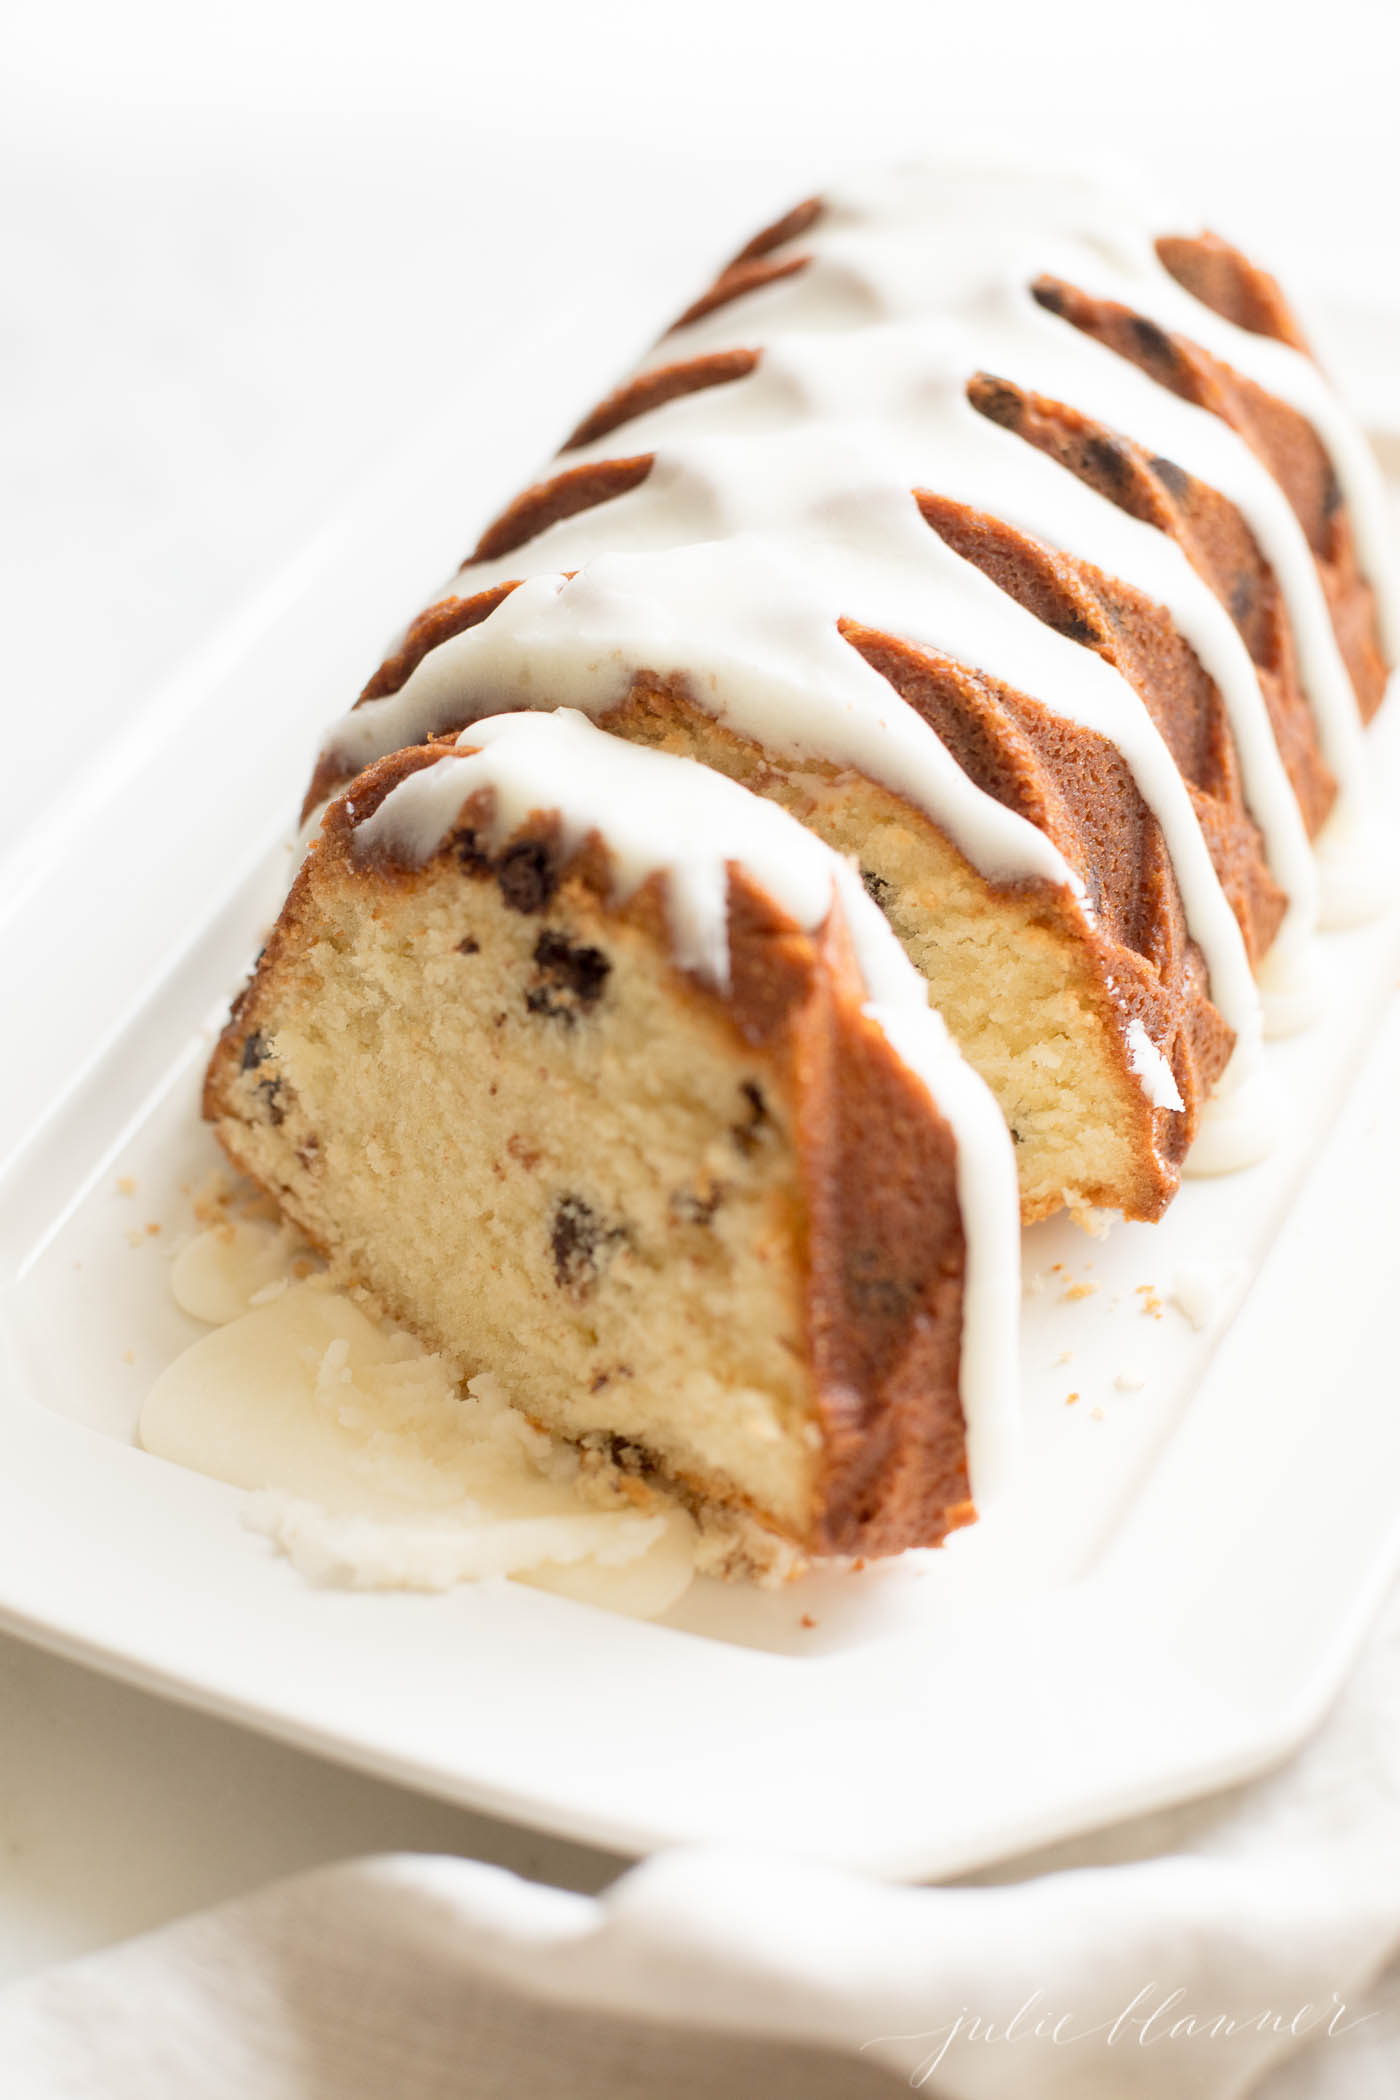 chocolate chip pound cake shaped in a decorative loaf, glazed with icing, resting on a white platter